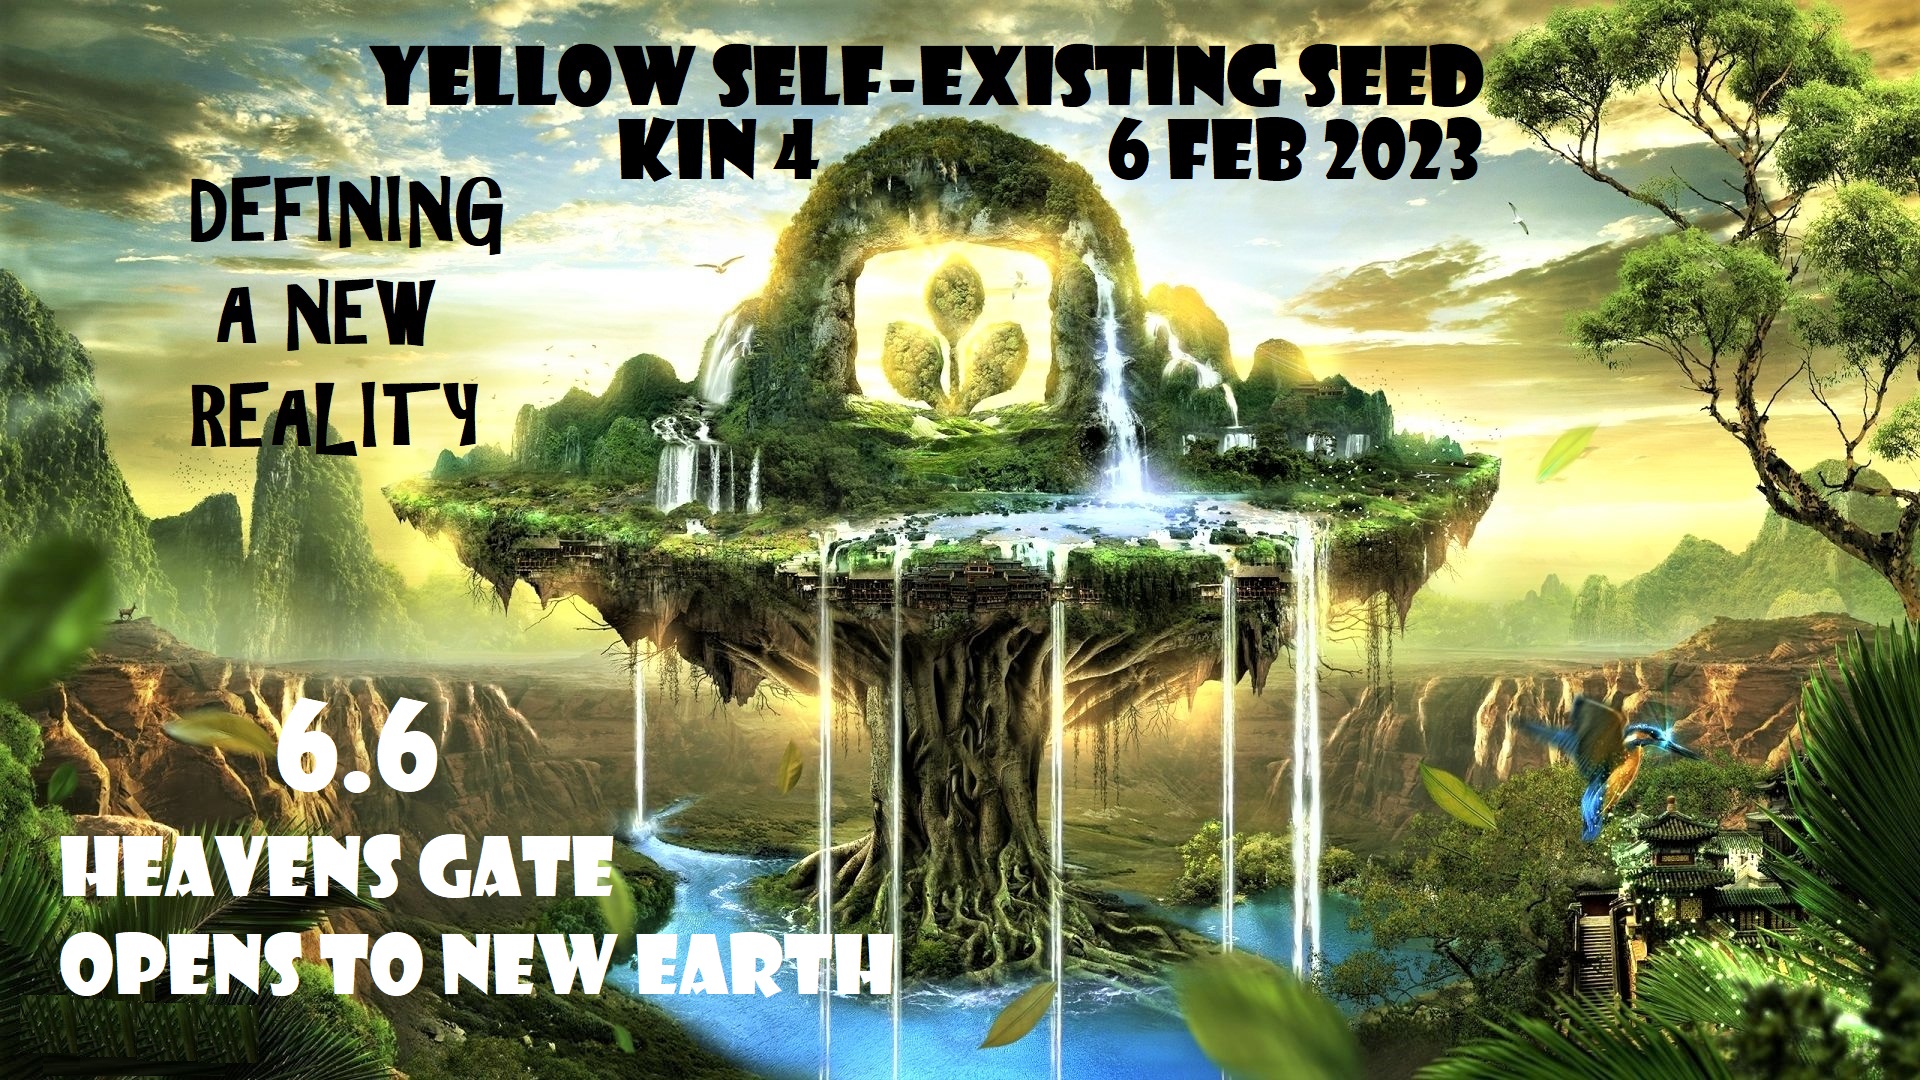 YELLOW SELF-EXISTING SEED